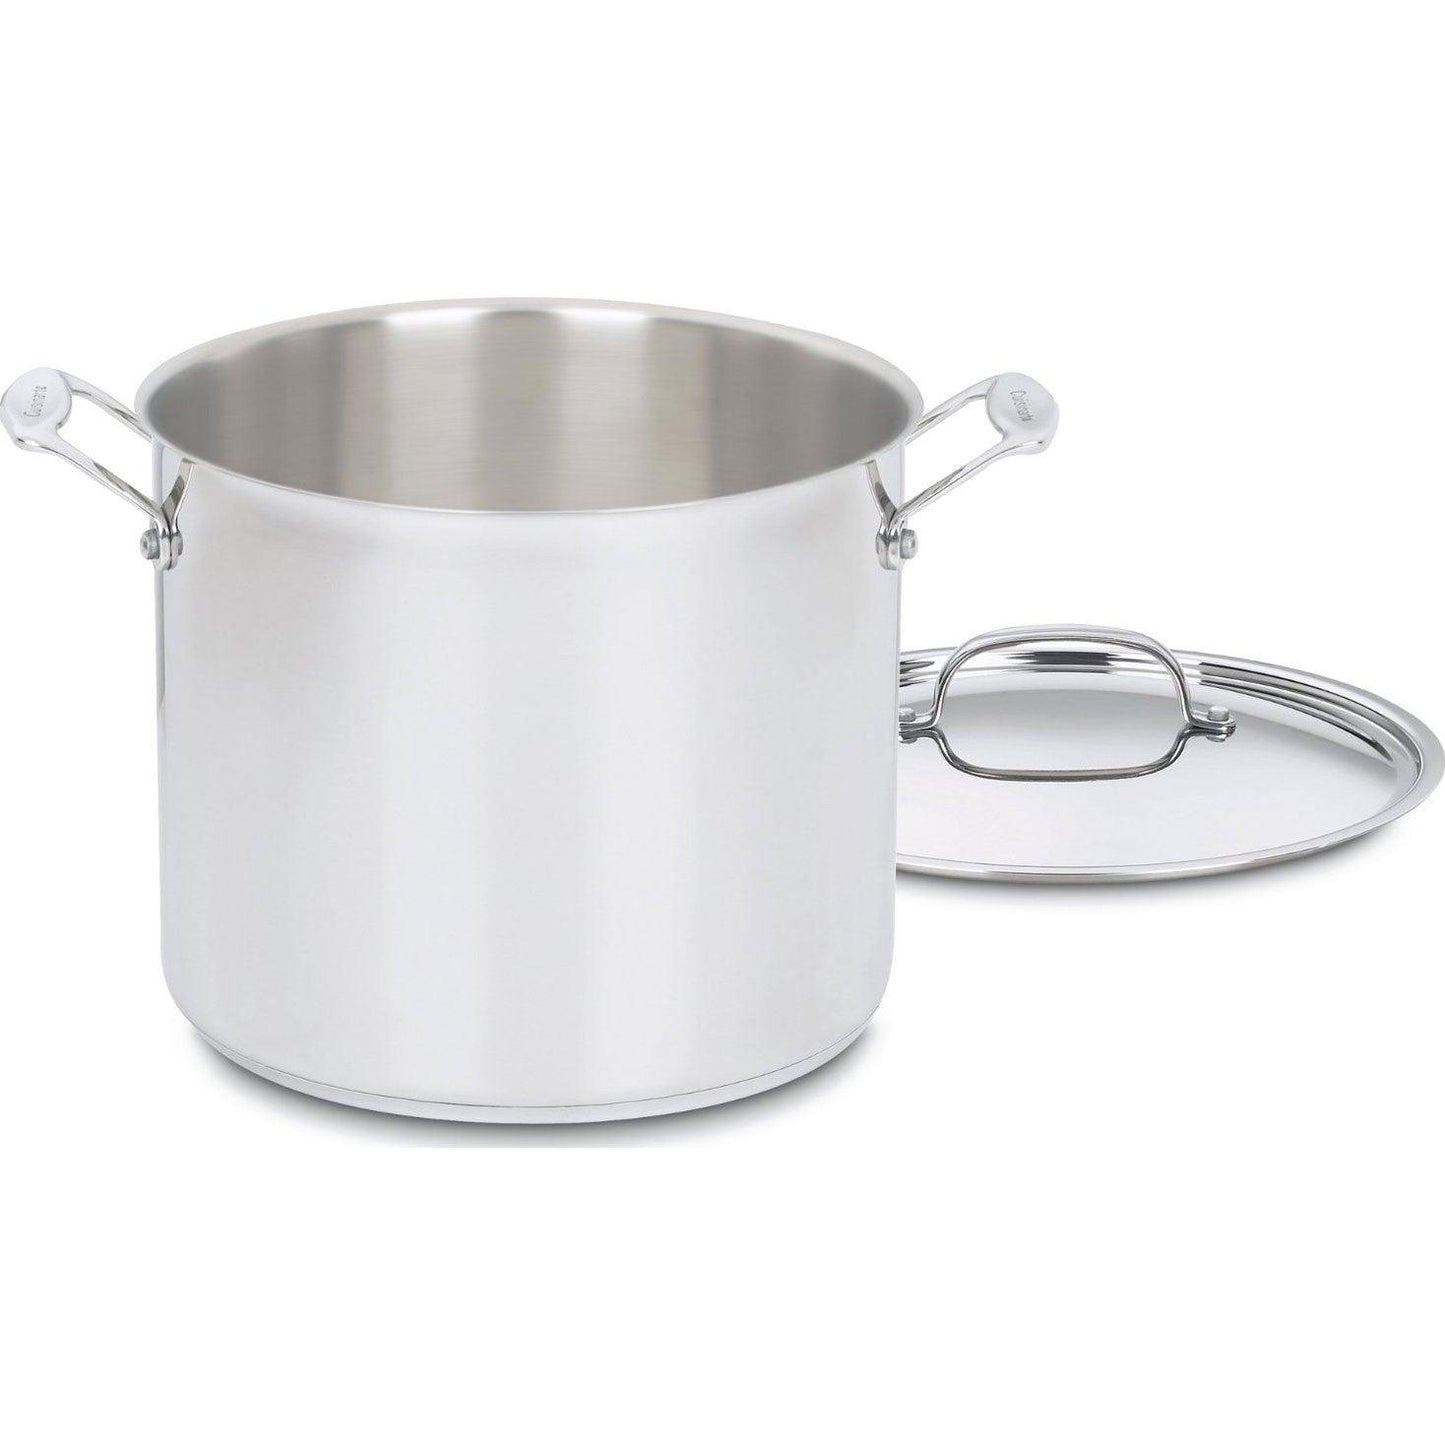 Cuisinart 12-Quart Stockpot w/Lid, Chef's Classic Collection, Silver, 766-26AP1 - CookCave